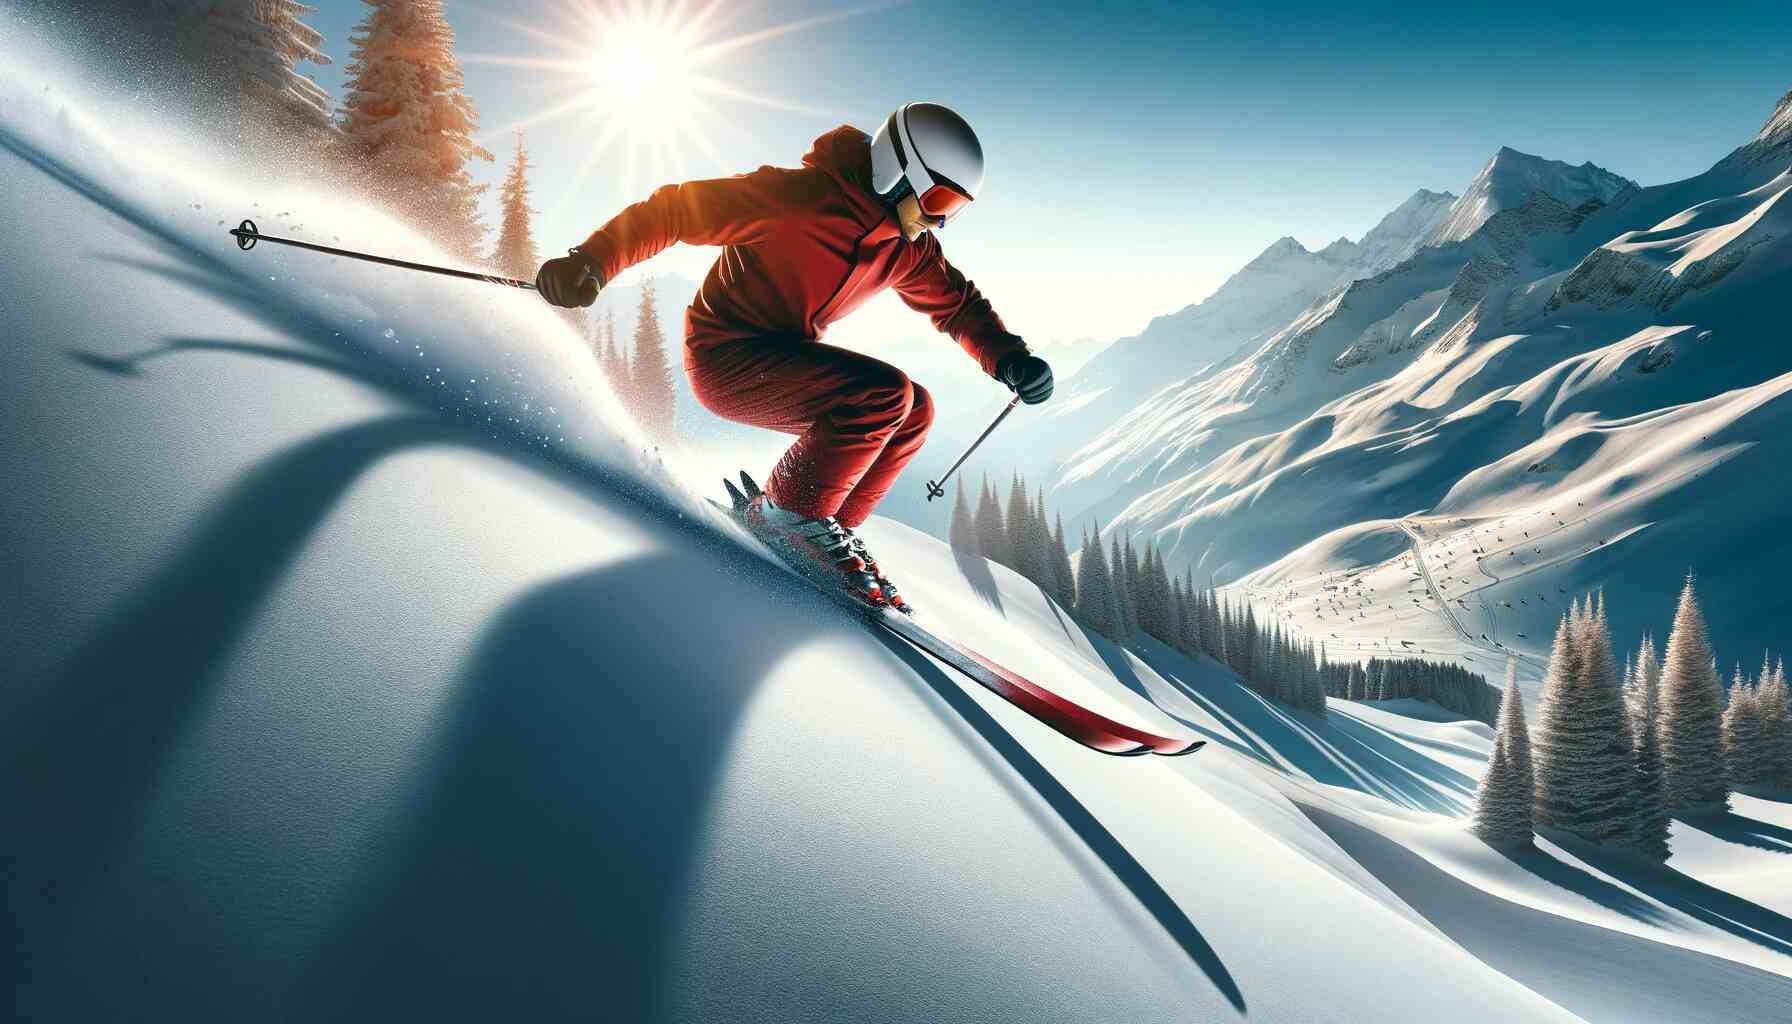 Here's the featured image for "Mastering the Fundamentals of Ski Technique," showcasing a skier in mid-descent with the title displayed at the top.